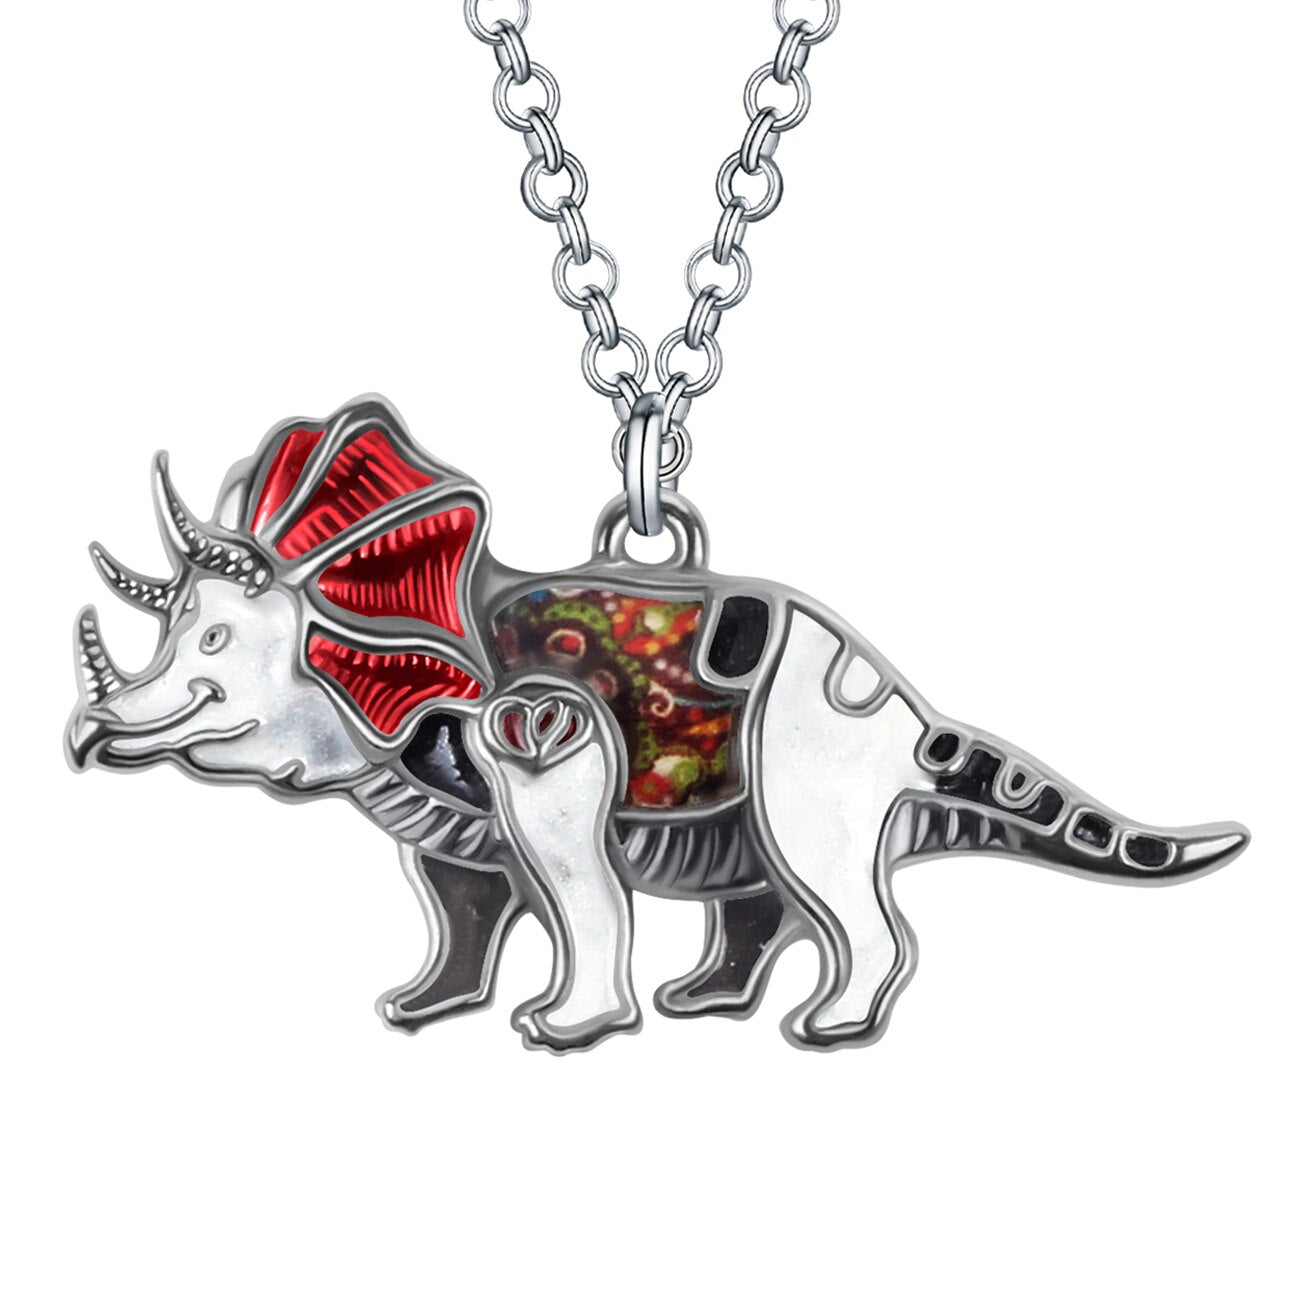 Multi-color Triceratops necklace - Style's Bug